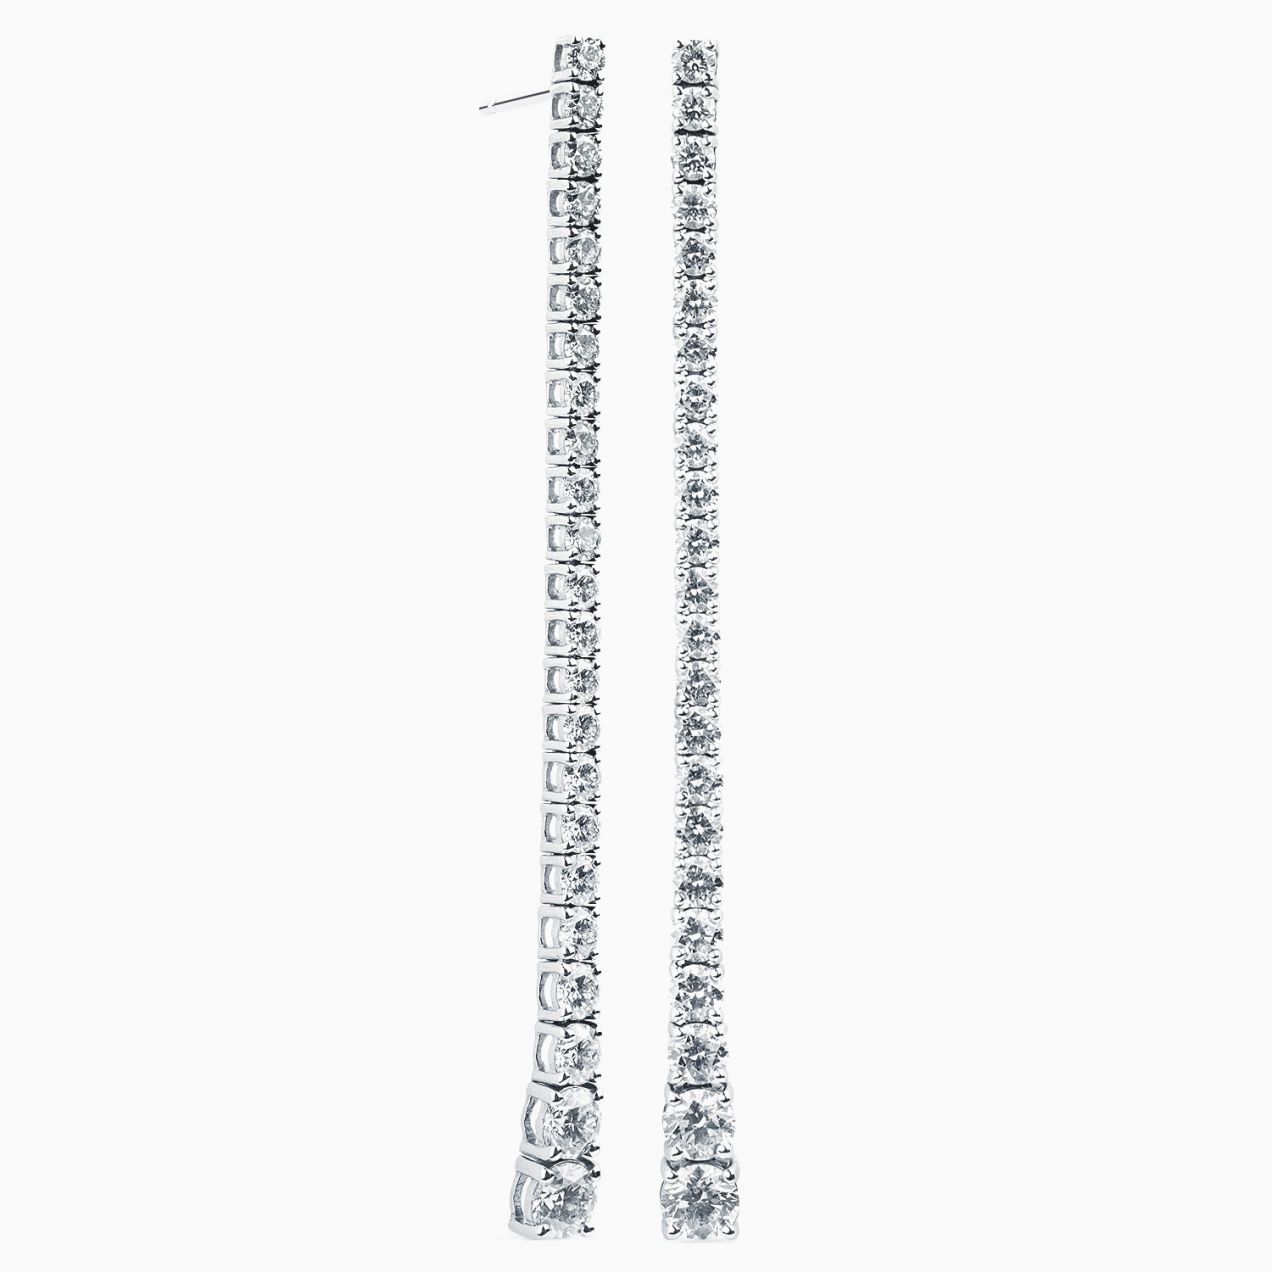 Long rivière earrings in white gold with diamonds